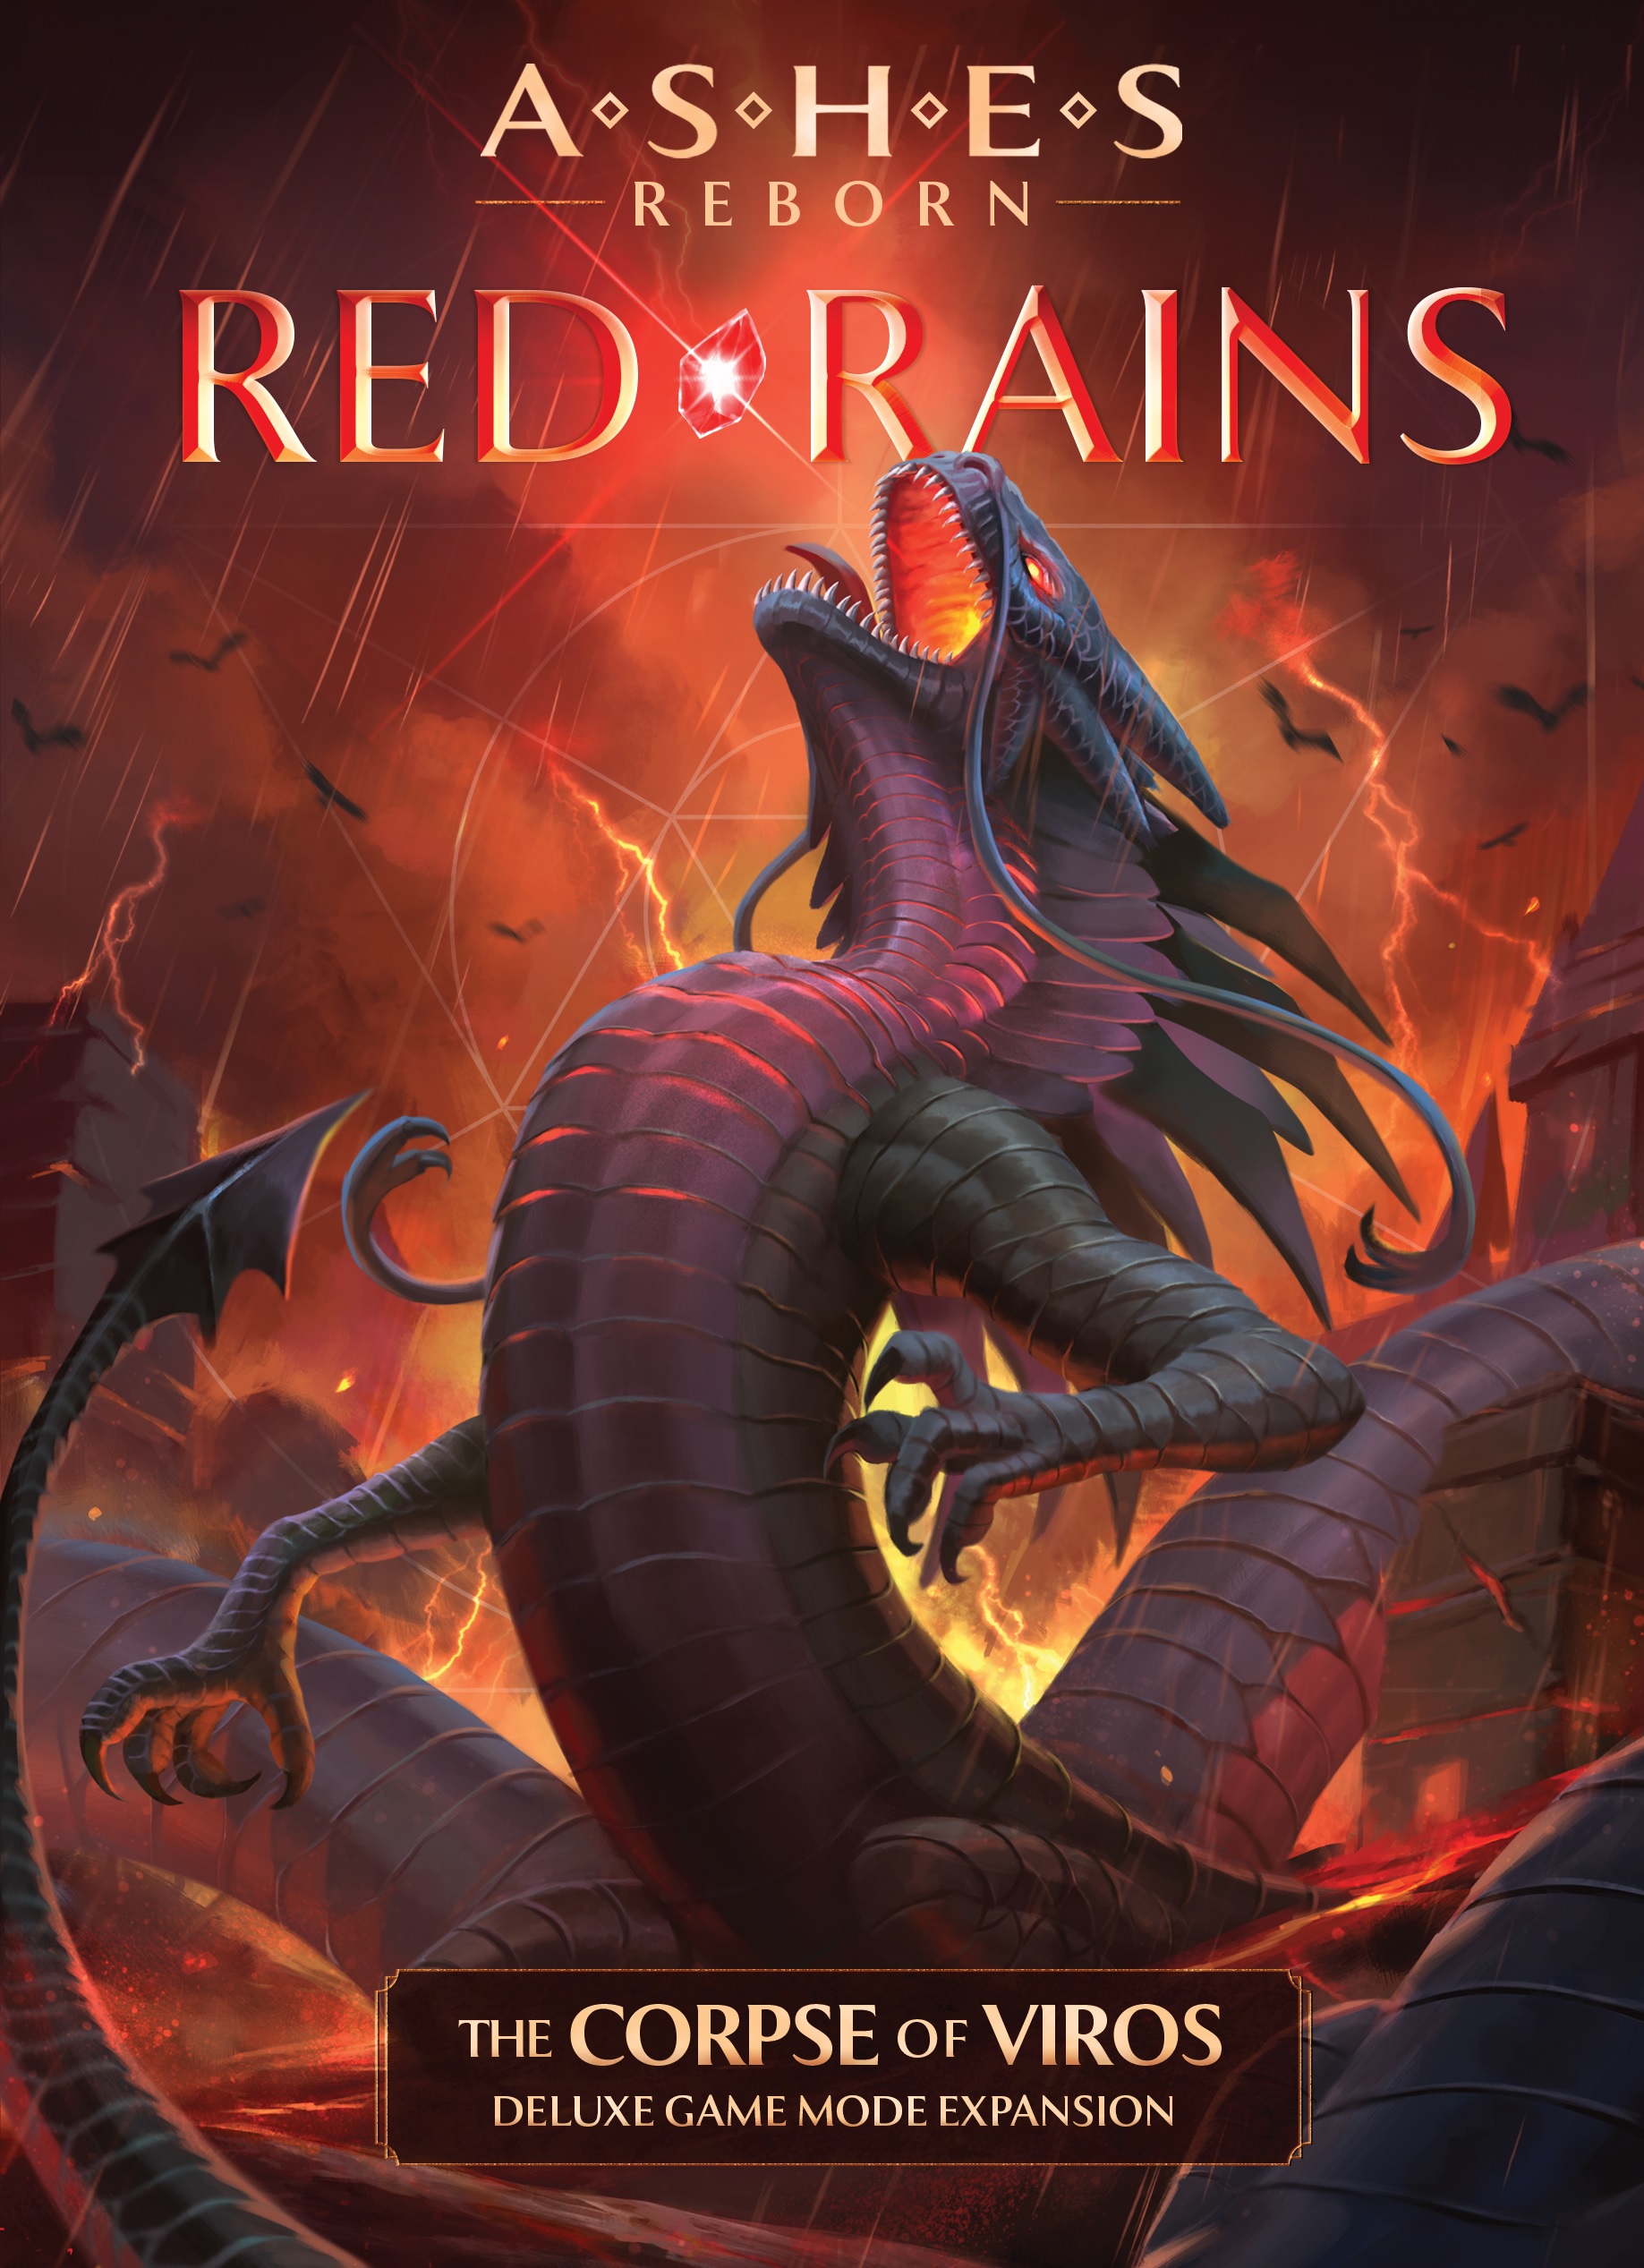 Ashes Reborn: Red Rains: The Corpse of Viros 